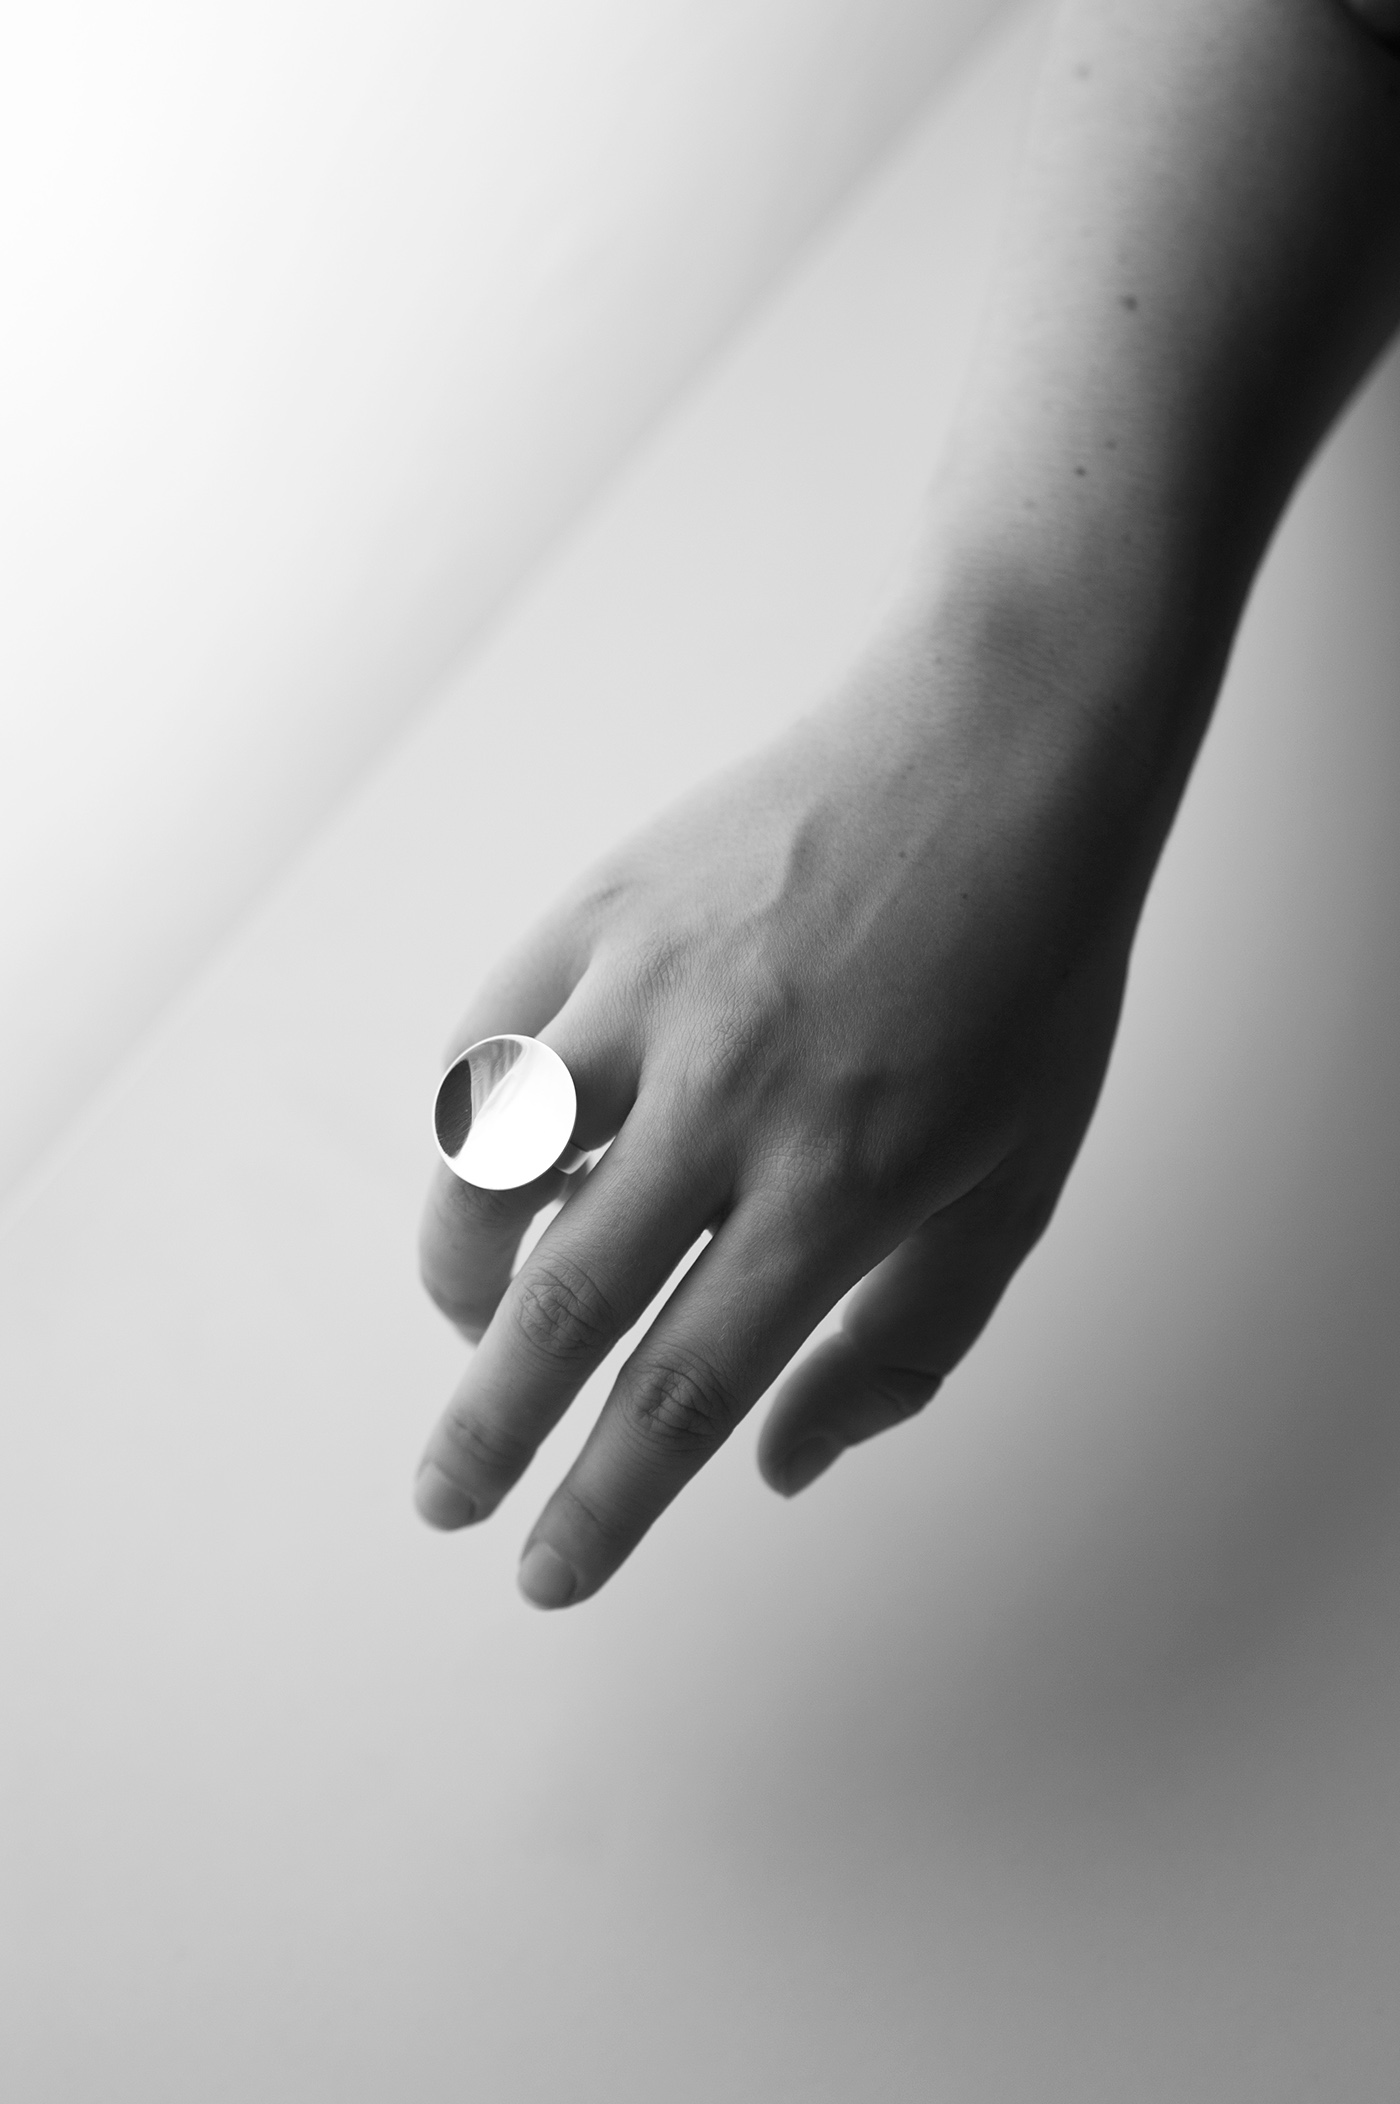 jewelry silver ring bw black and white BW photography design